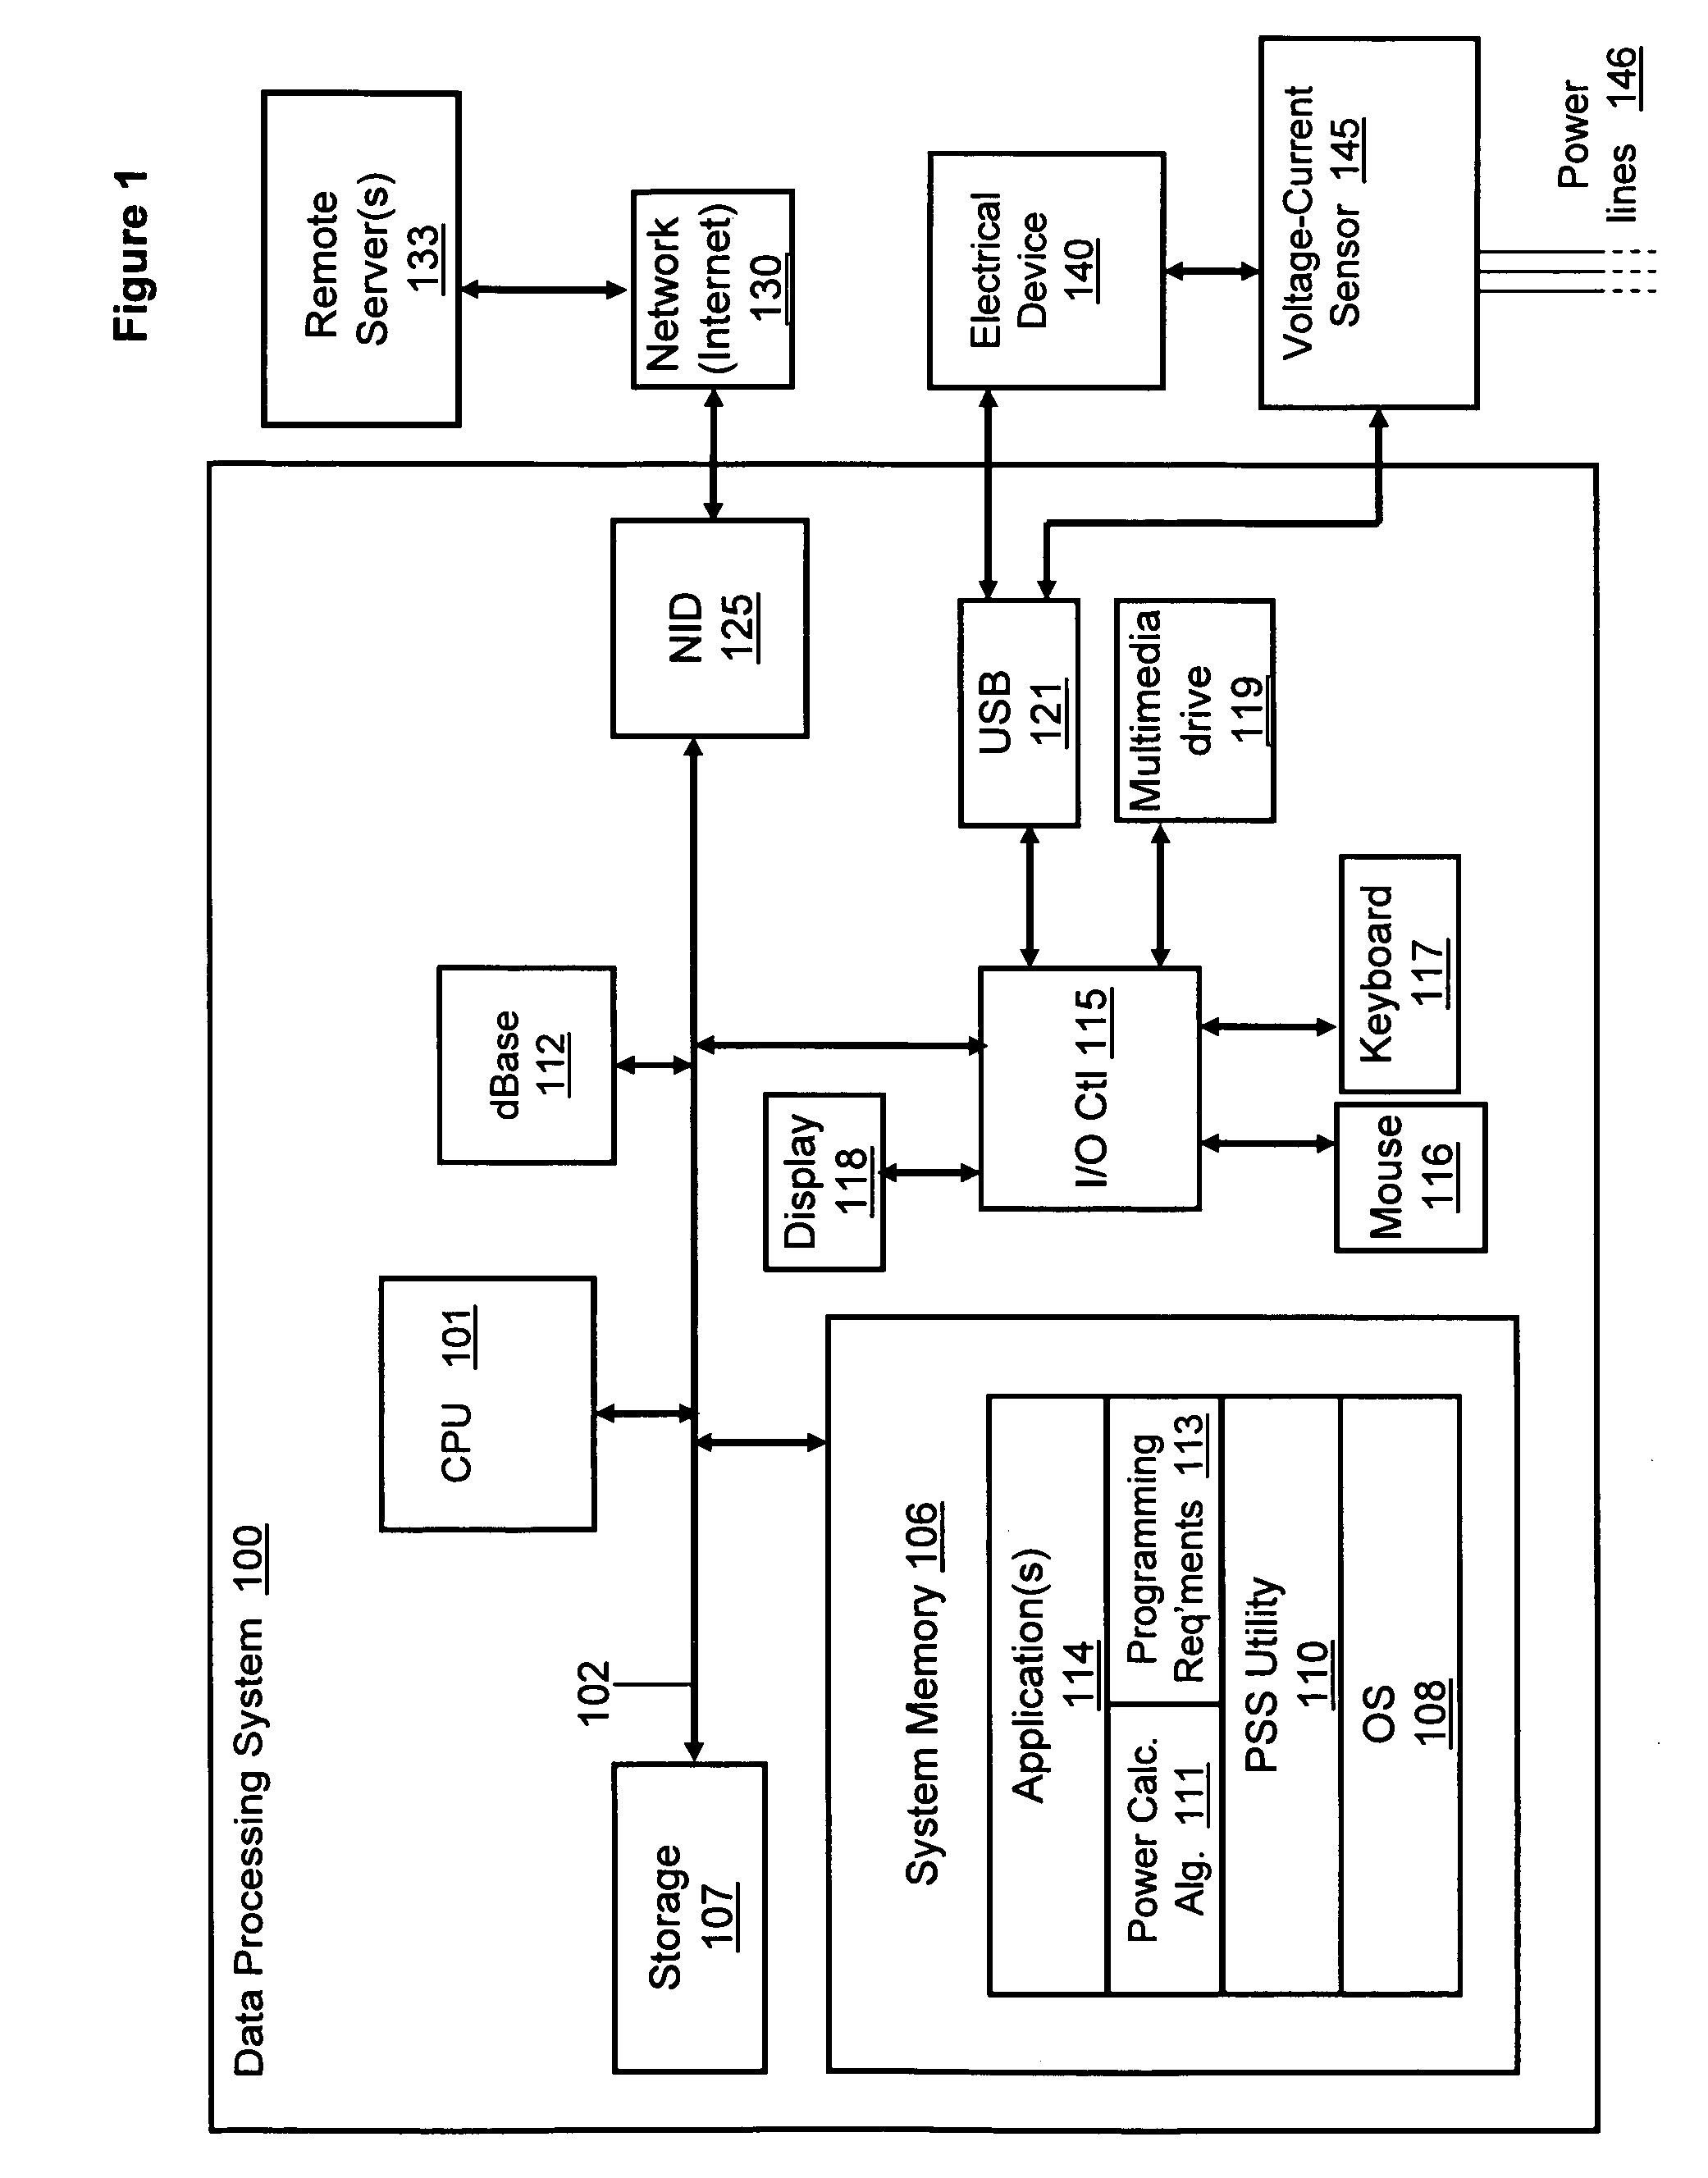 Dynamic specification of power supply sources